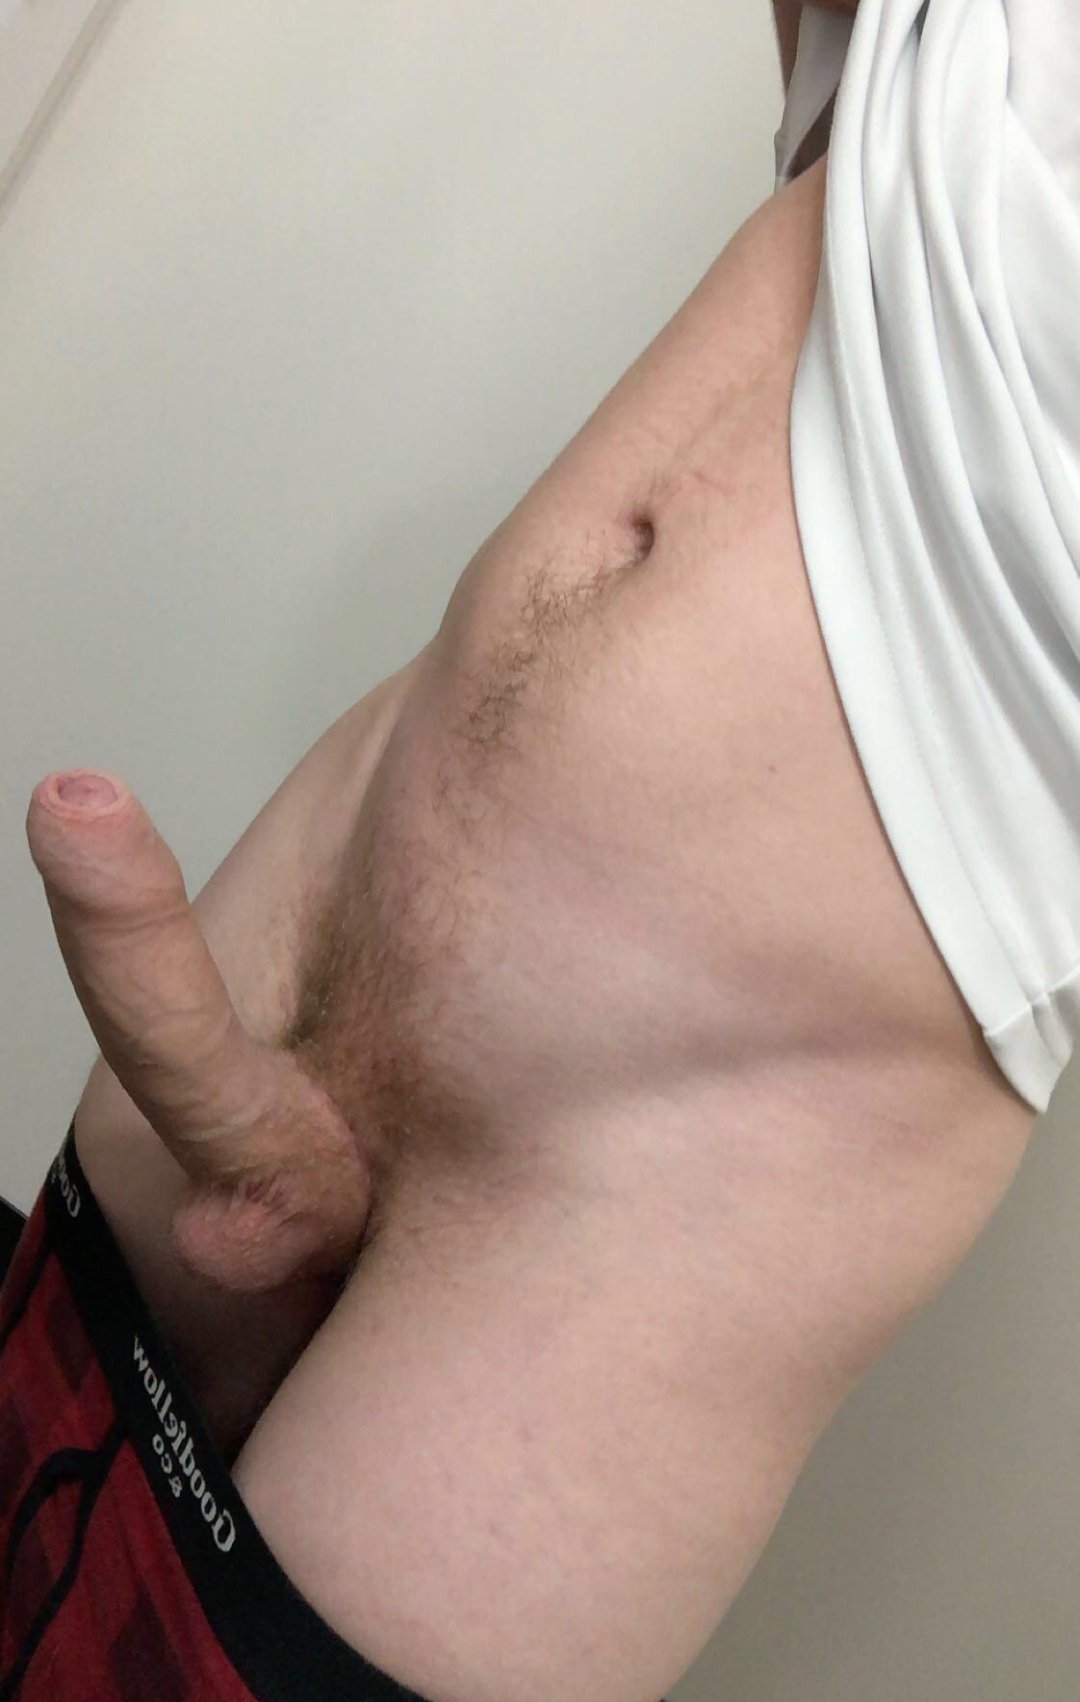 Small Balls Porn - Hard dick and small balls - Penis Pictures